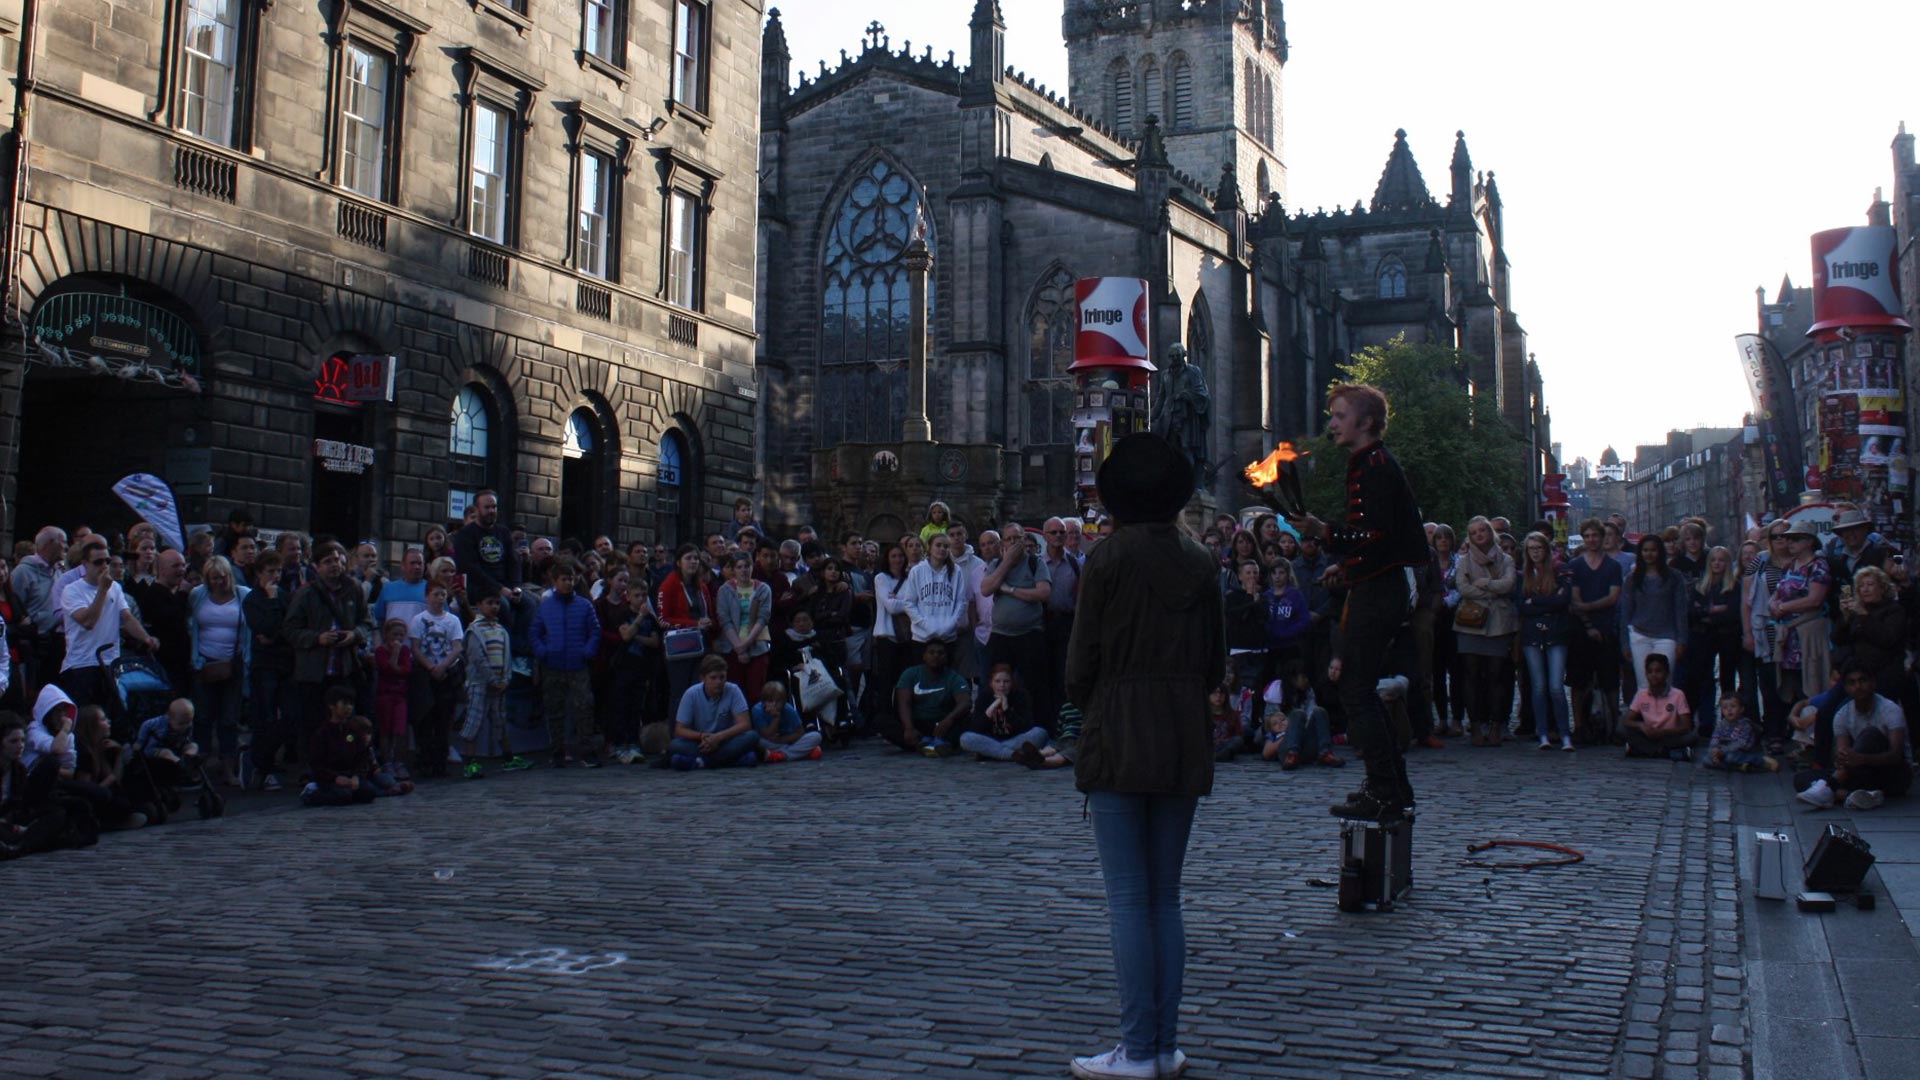 The Royal Mile and St. Giles Cathedral